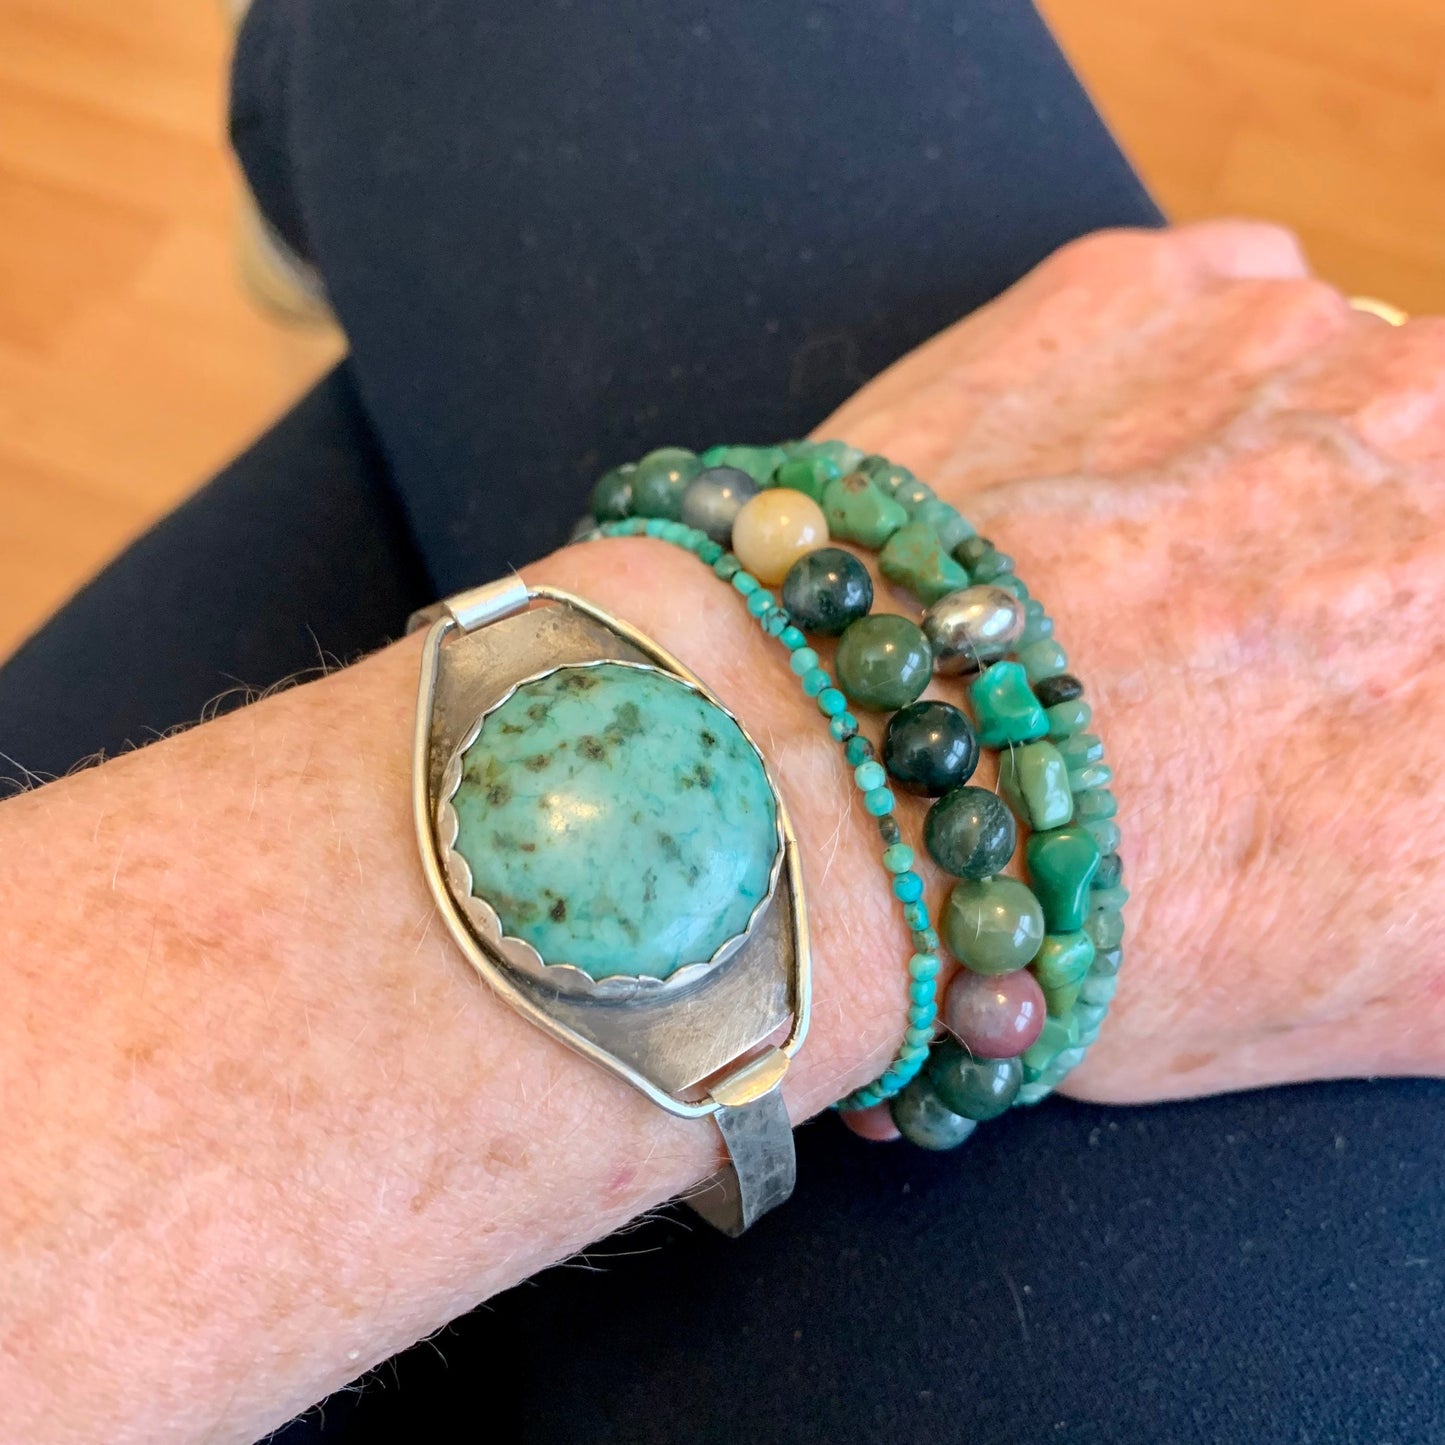 Turquoise colored feldspar stone cuff bracelet with a link closure - stone and silver power bracelet - one of a kind - handmade - statement piece for women